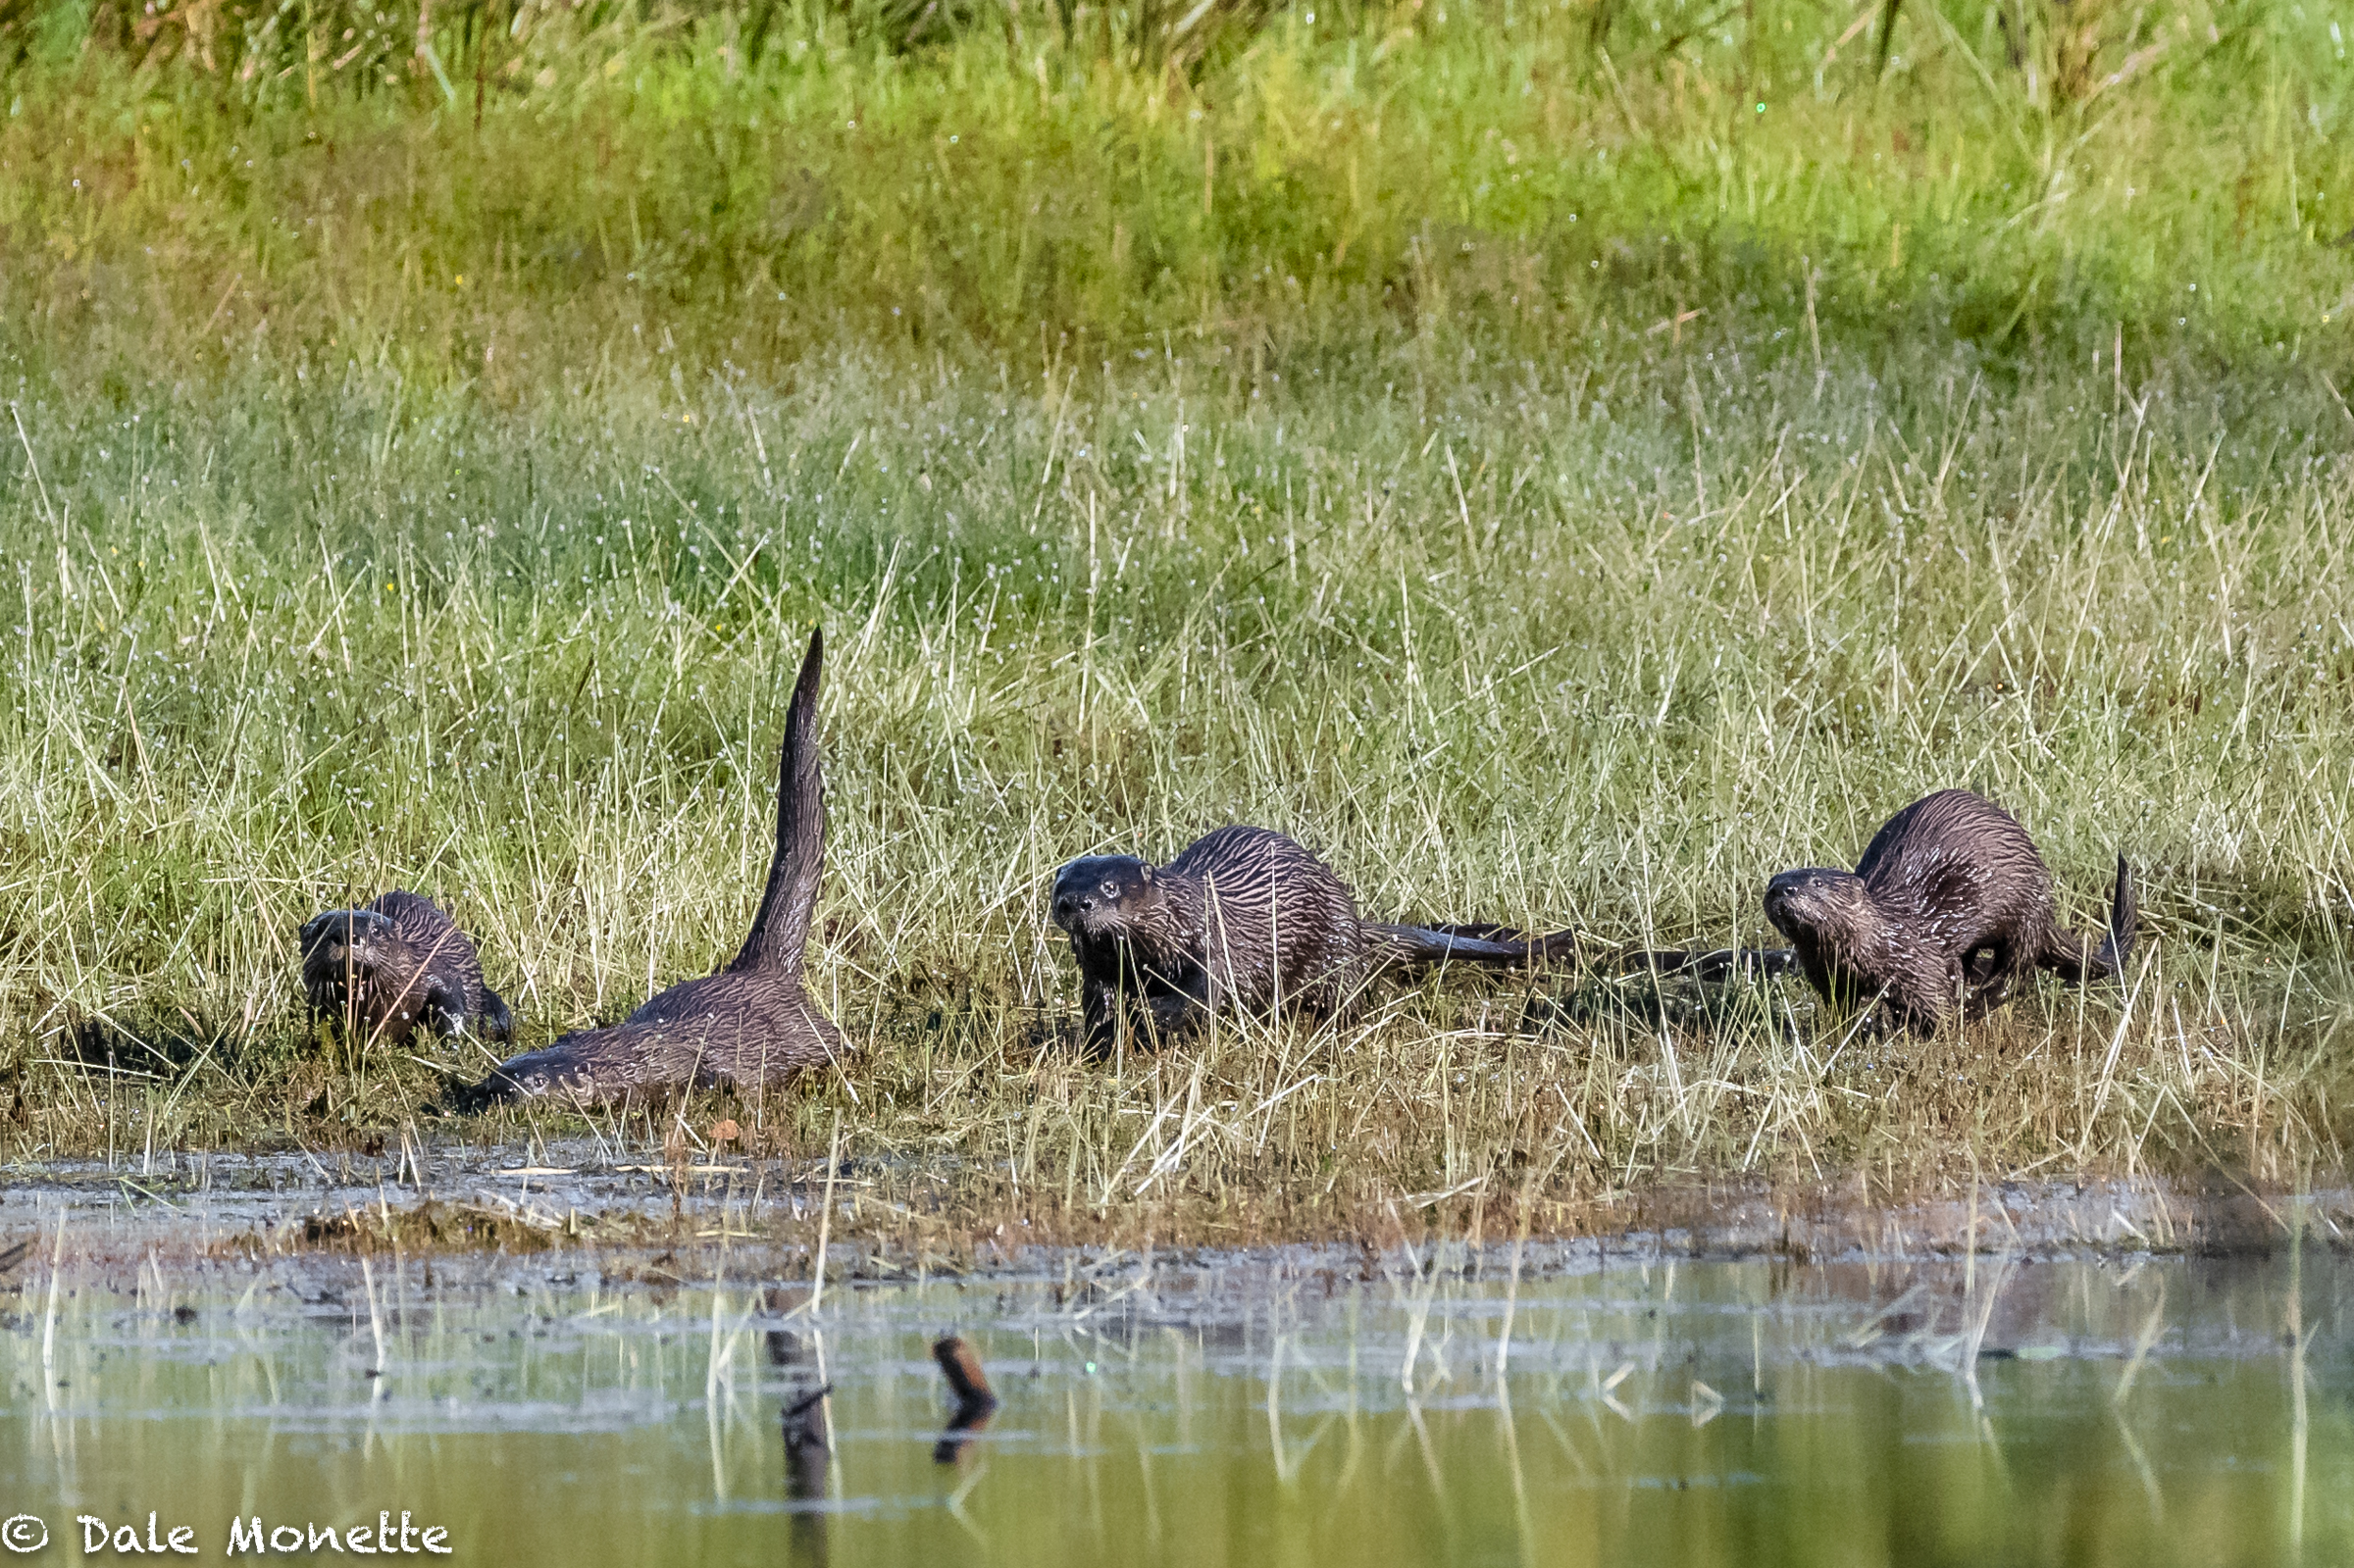   I’ve seen these 4 otters before. They are a family but today they spent 35 minutes hanging out in front of me and was loads of fun to watch. I never get to watch a family that long so this was a real treat.  